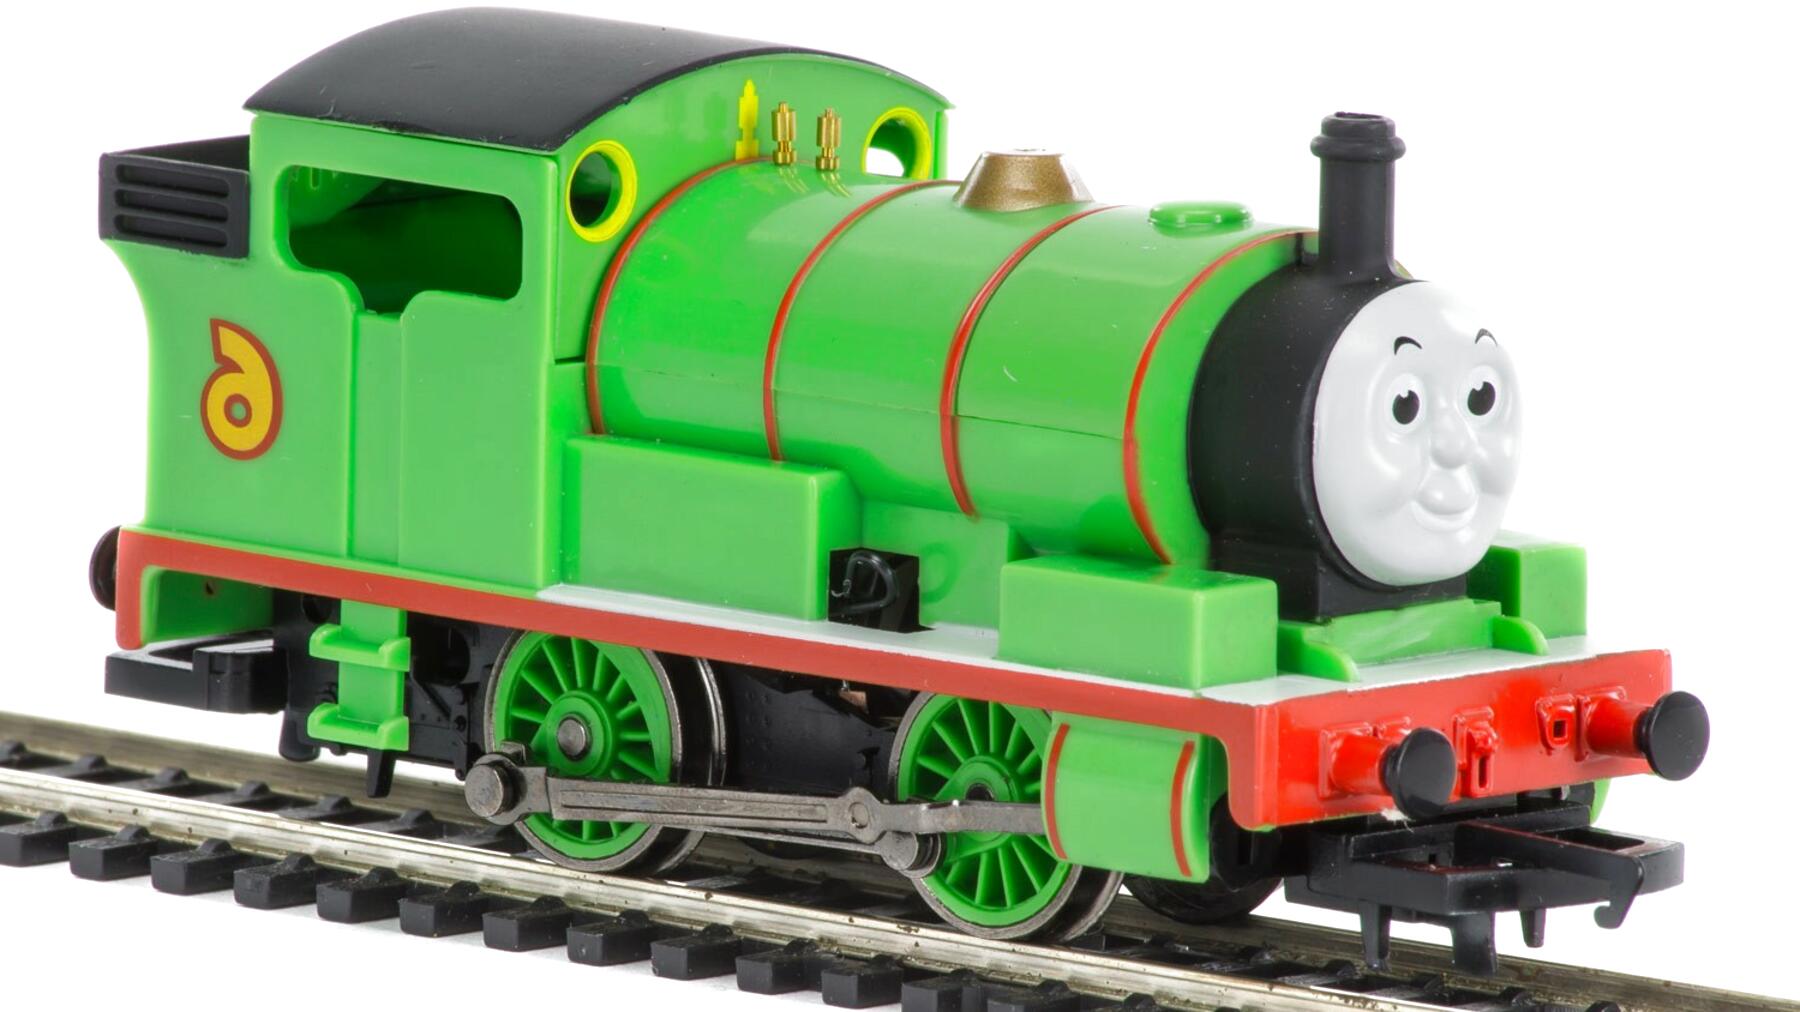 hornby percy